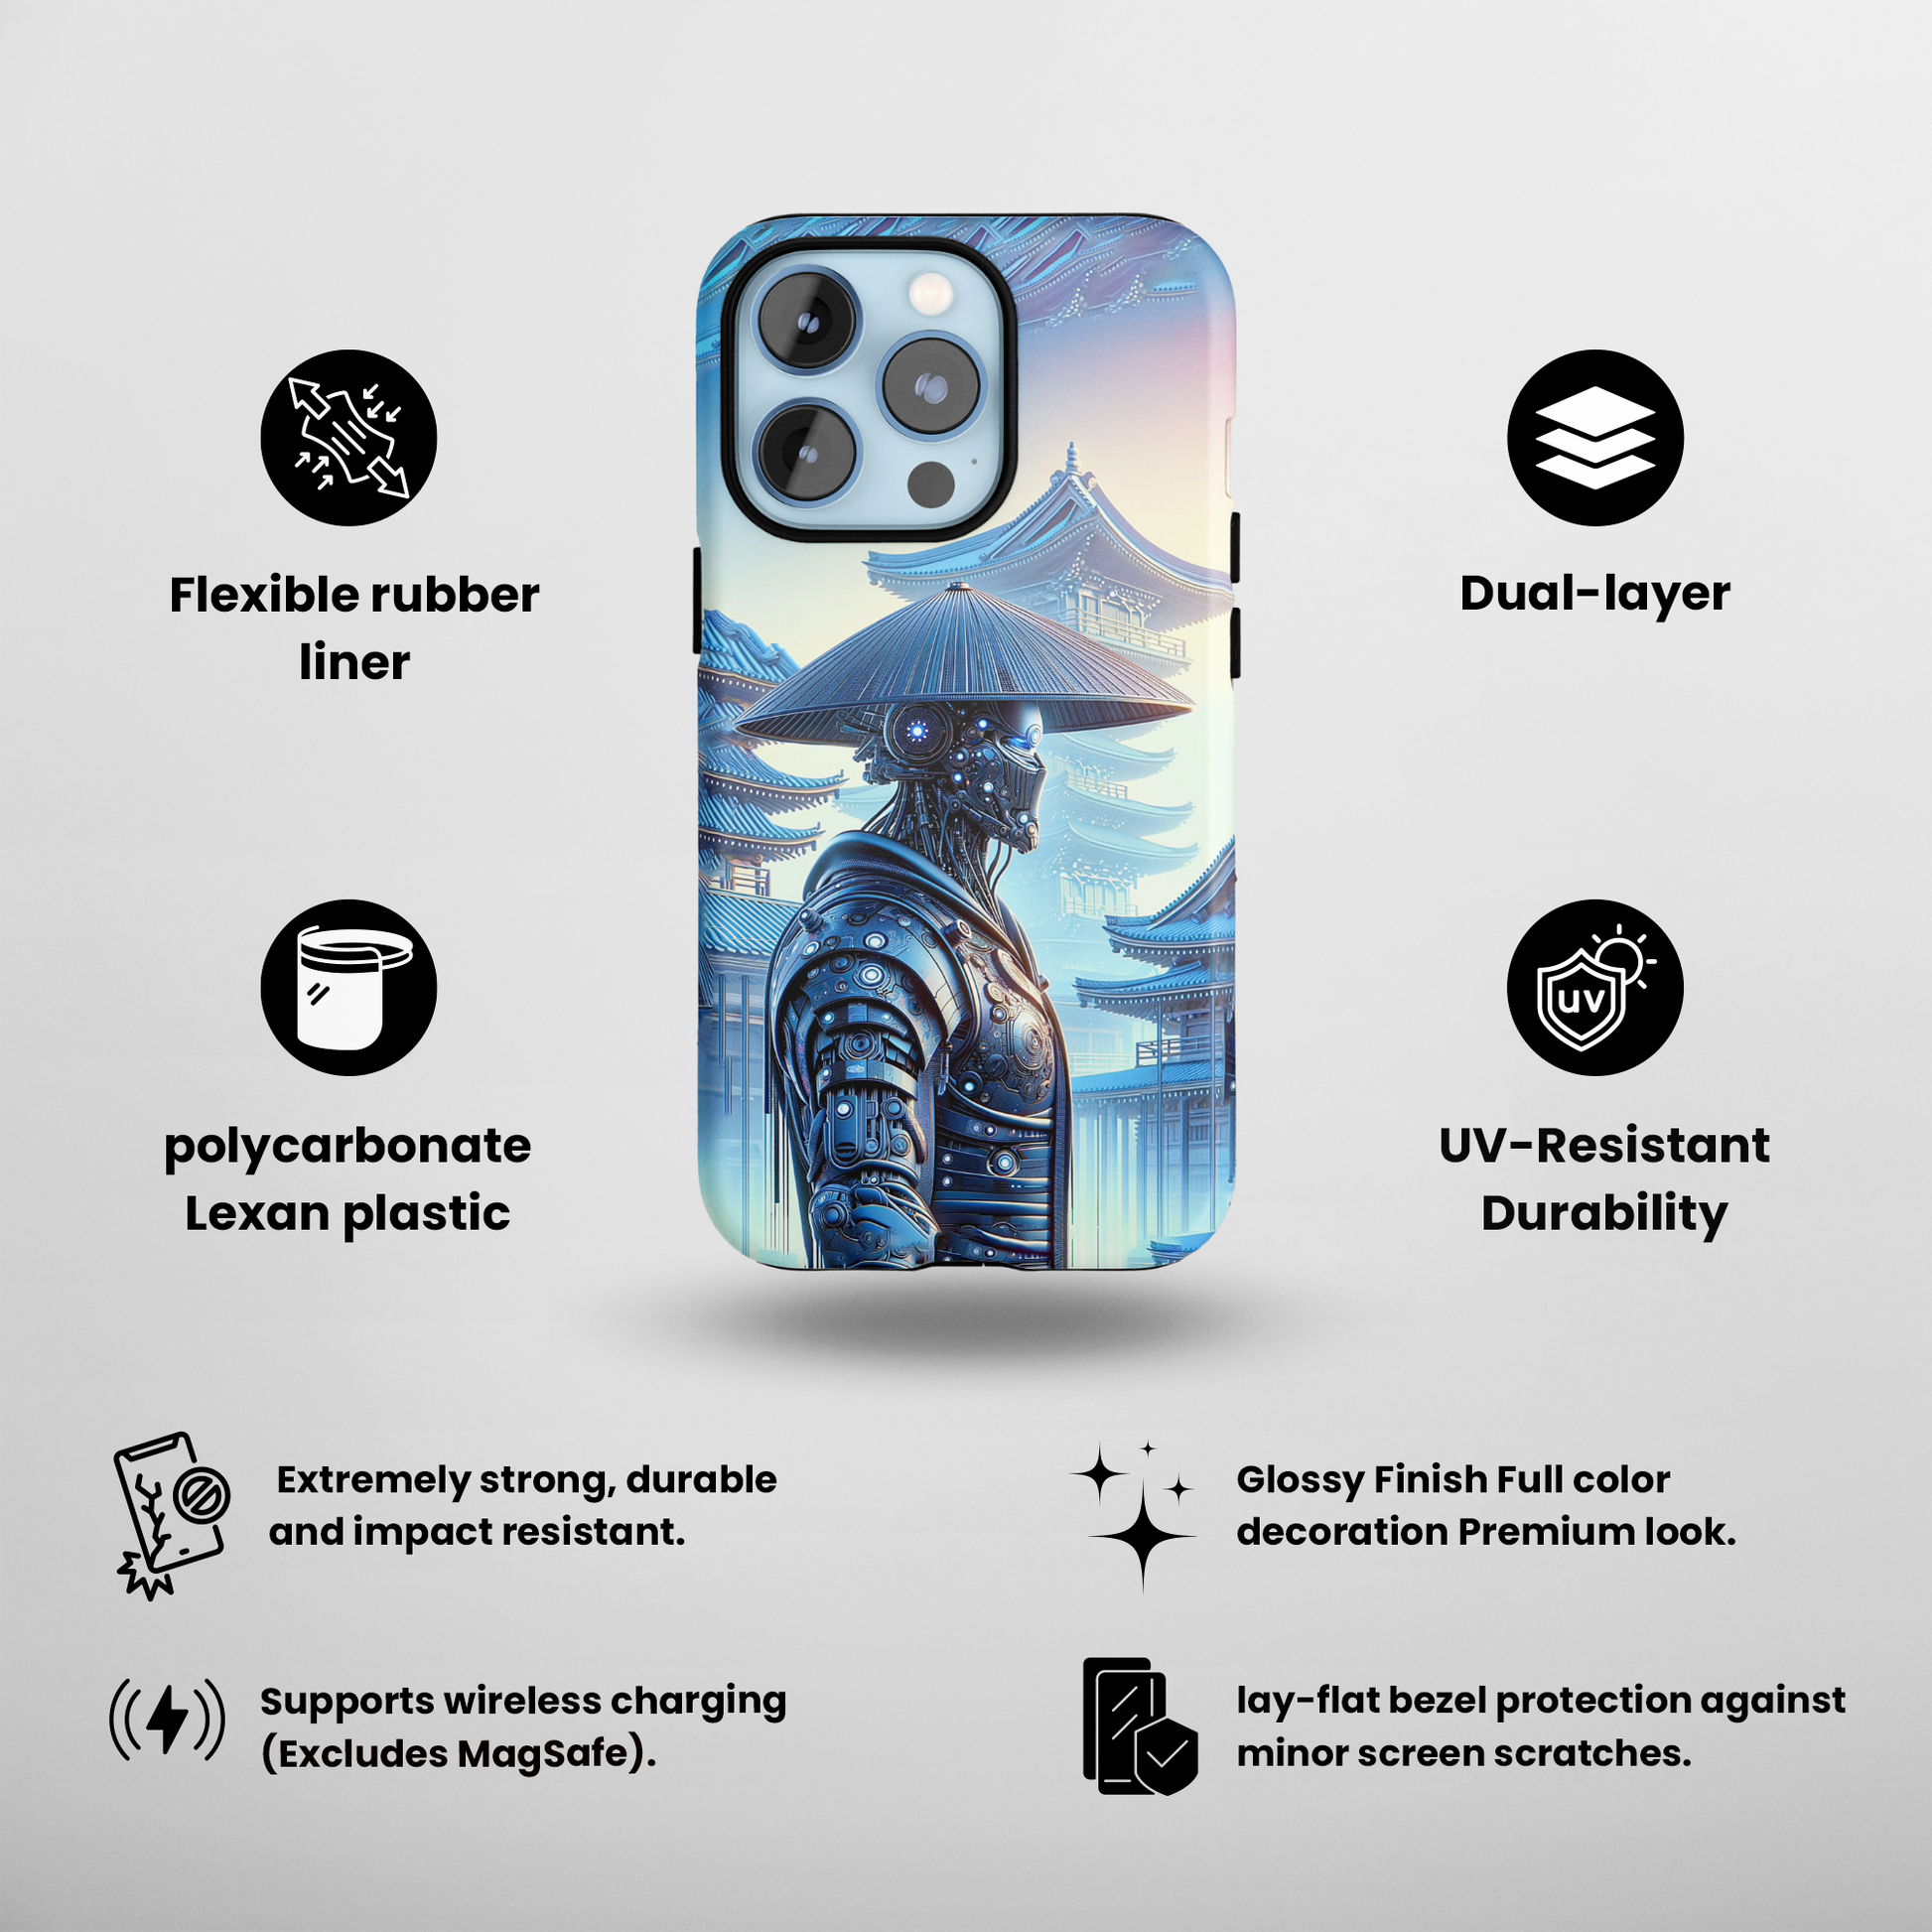 Neo-Tokyo Sentinel (iPhone Case 11-15)Safeguard Your iPhone in Style with RIMA Tough Cases. Designed for iPhone 11-15, these cases offer the ultimate blend of sophistication and resilience. Eco-consciousRimaGallery